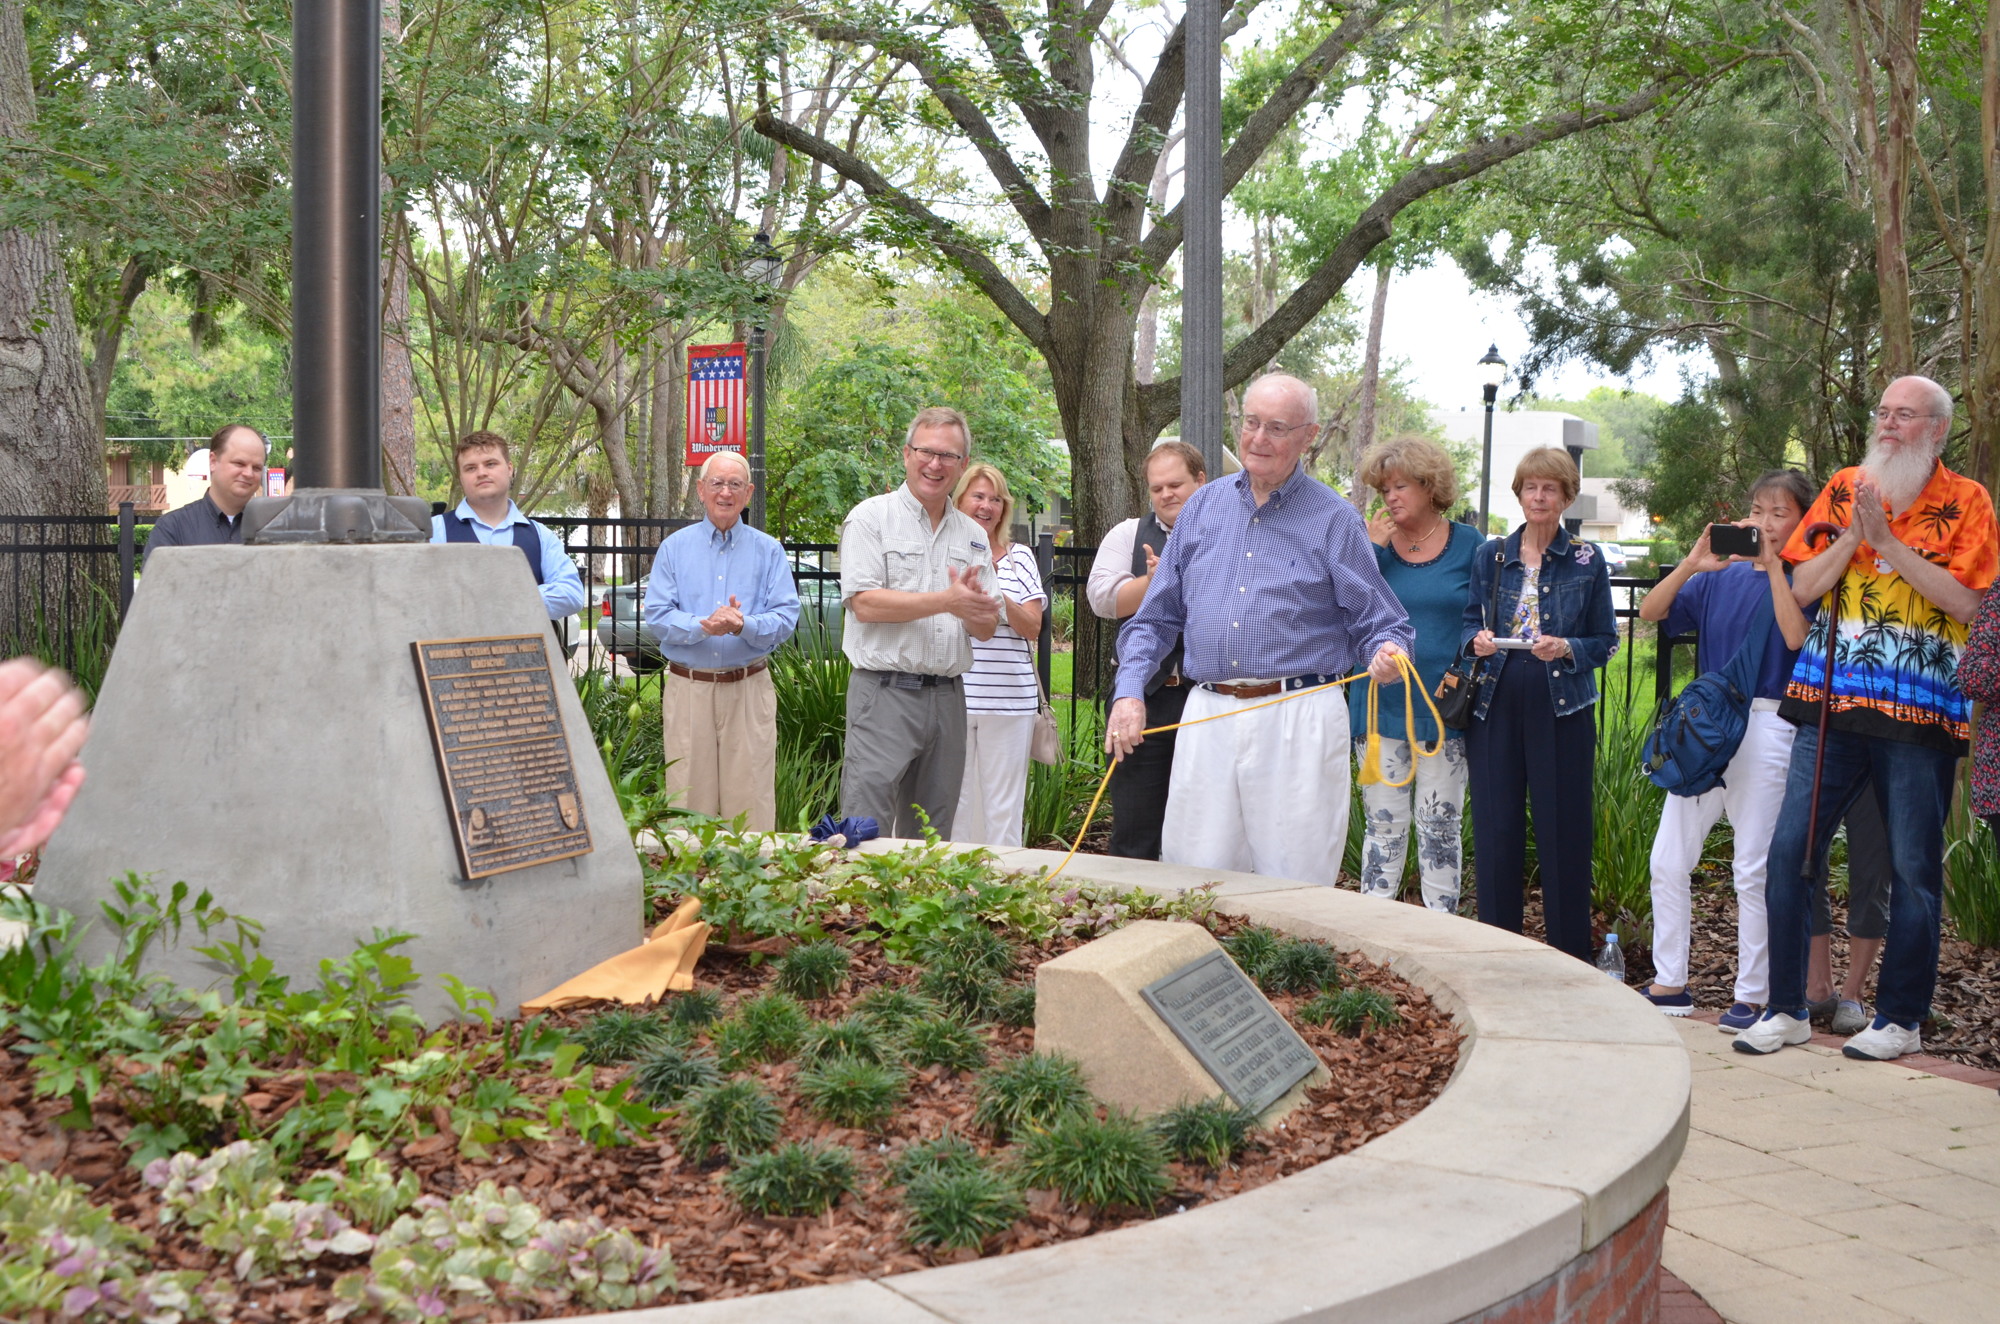 Bill Criswell unveils the benefactors plaque for the Windermere Veterans Memorial project.